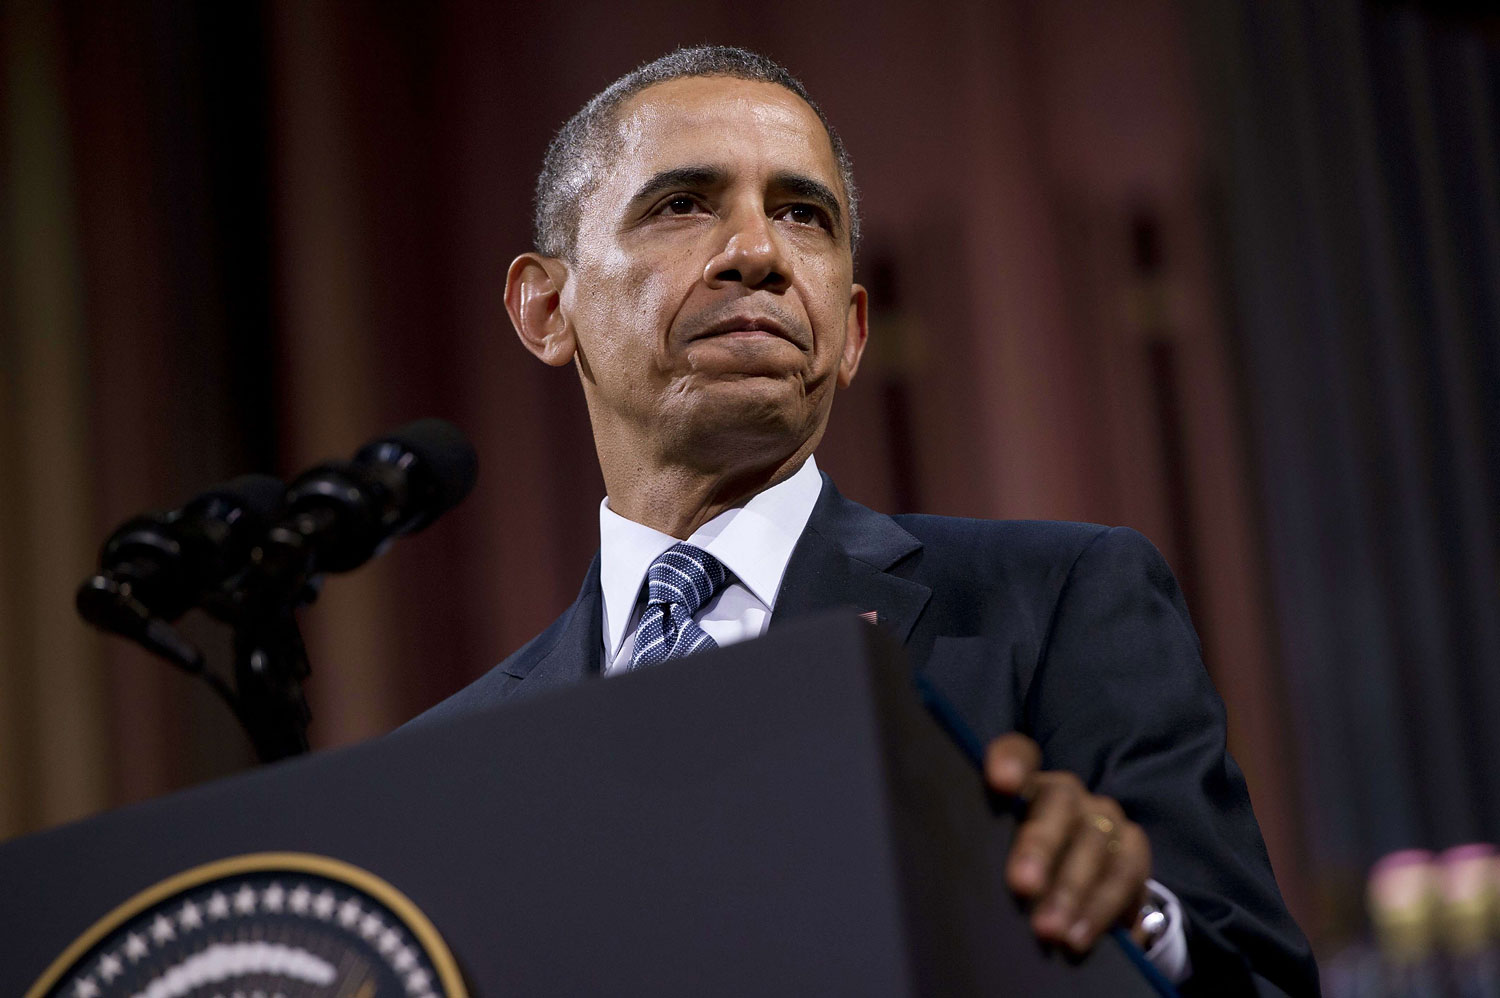 President Barack Obama delivers a speech at the Palais des Beaux-Arts in Brussels on March 26, 2014.